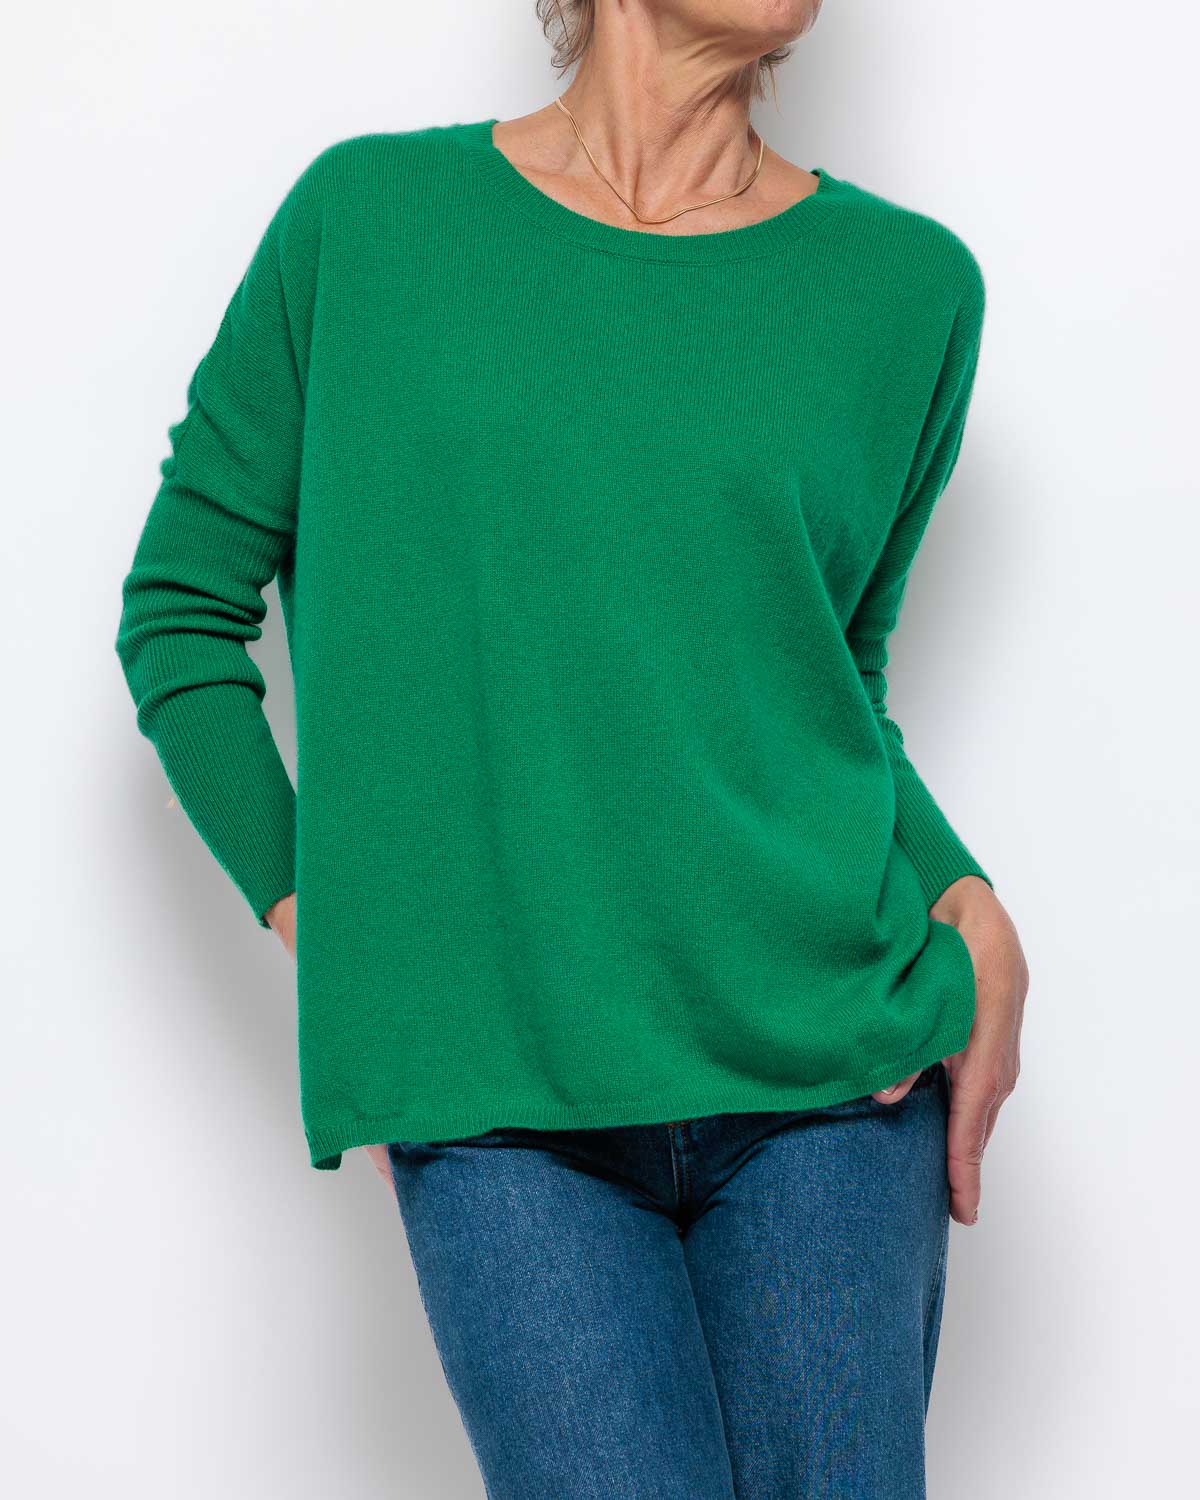 Absolut Cashmere Astrid Sweater in Basilica